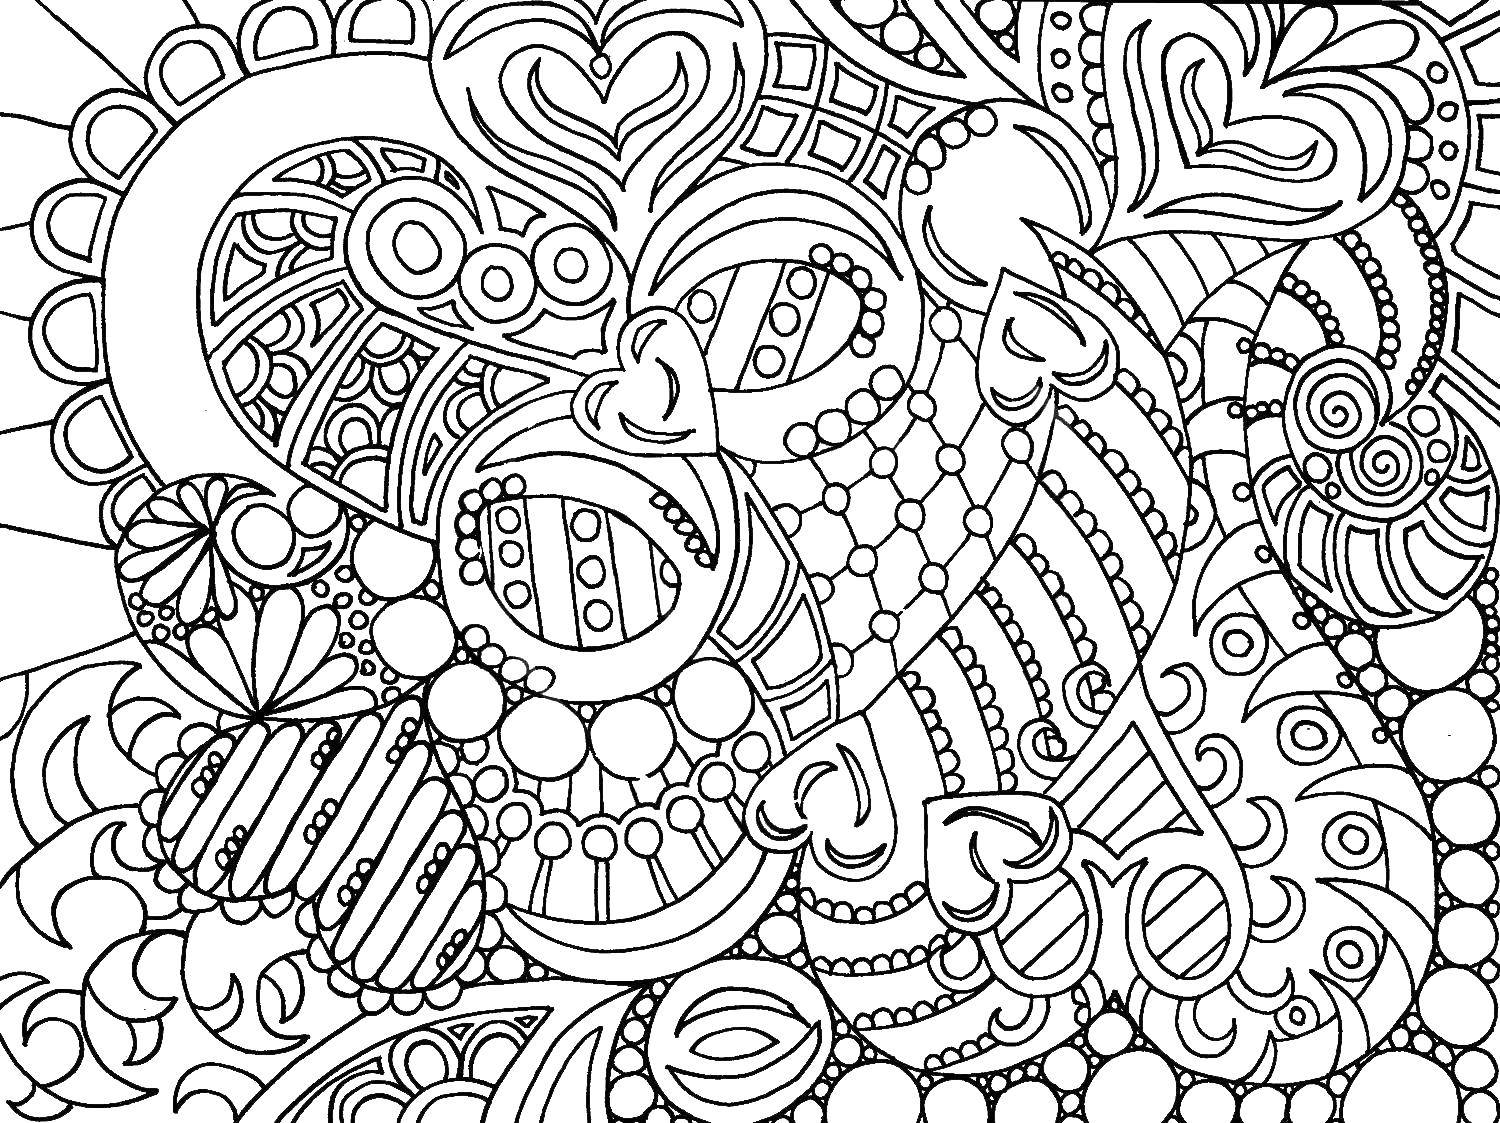 Coloring Hearts. Category Hearts. Tags:  heart, patterns.